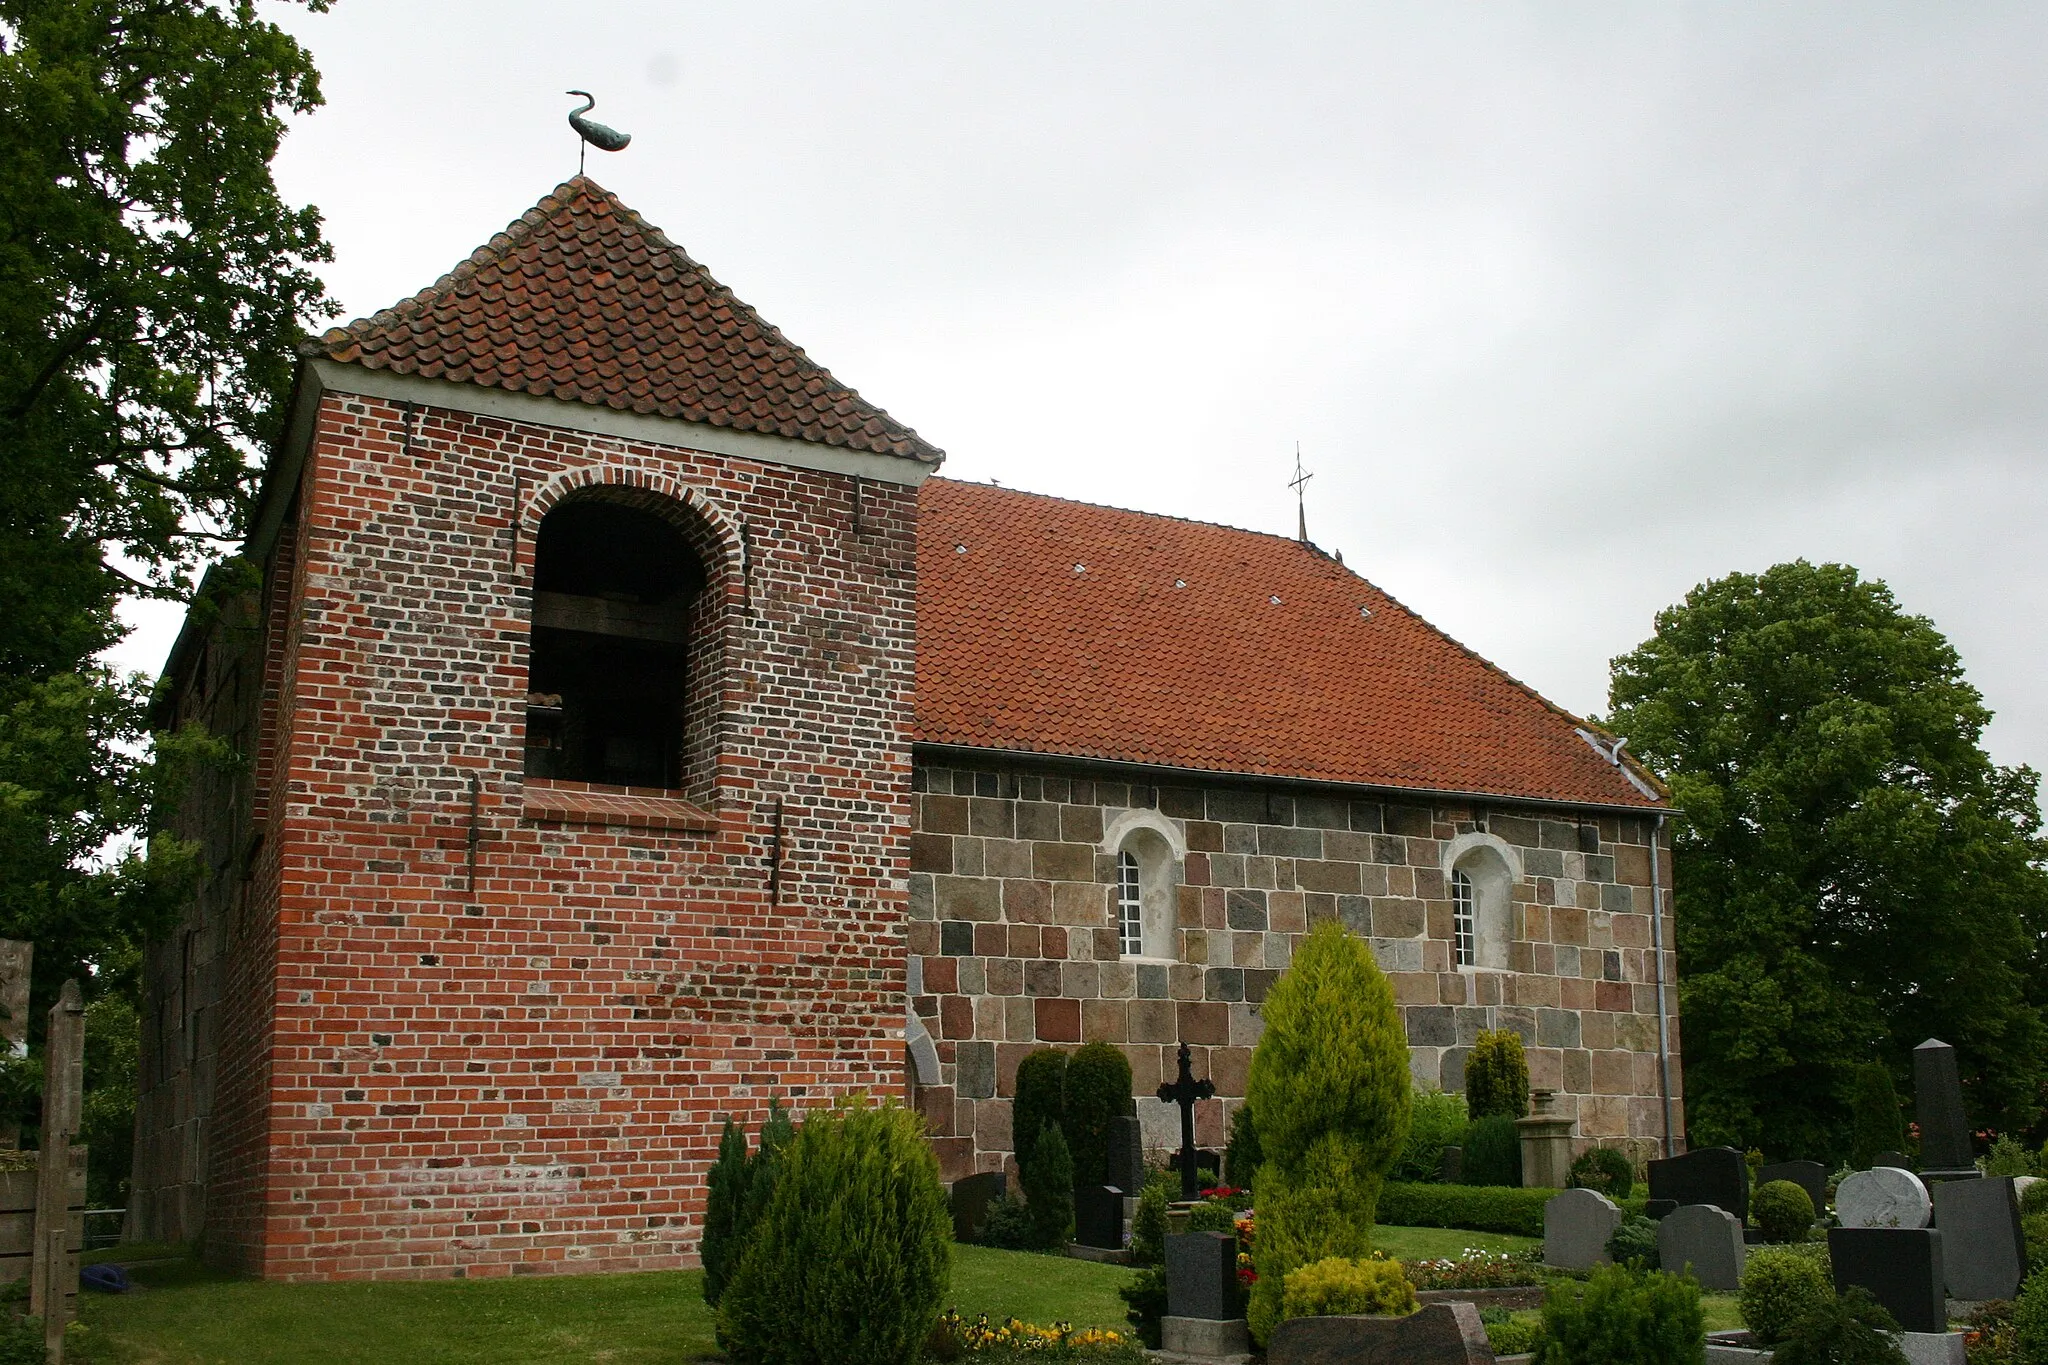 Photo showing: Historic Saint Dionysius Church in Asel, district of Wittmund, East Frisia, Germany